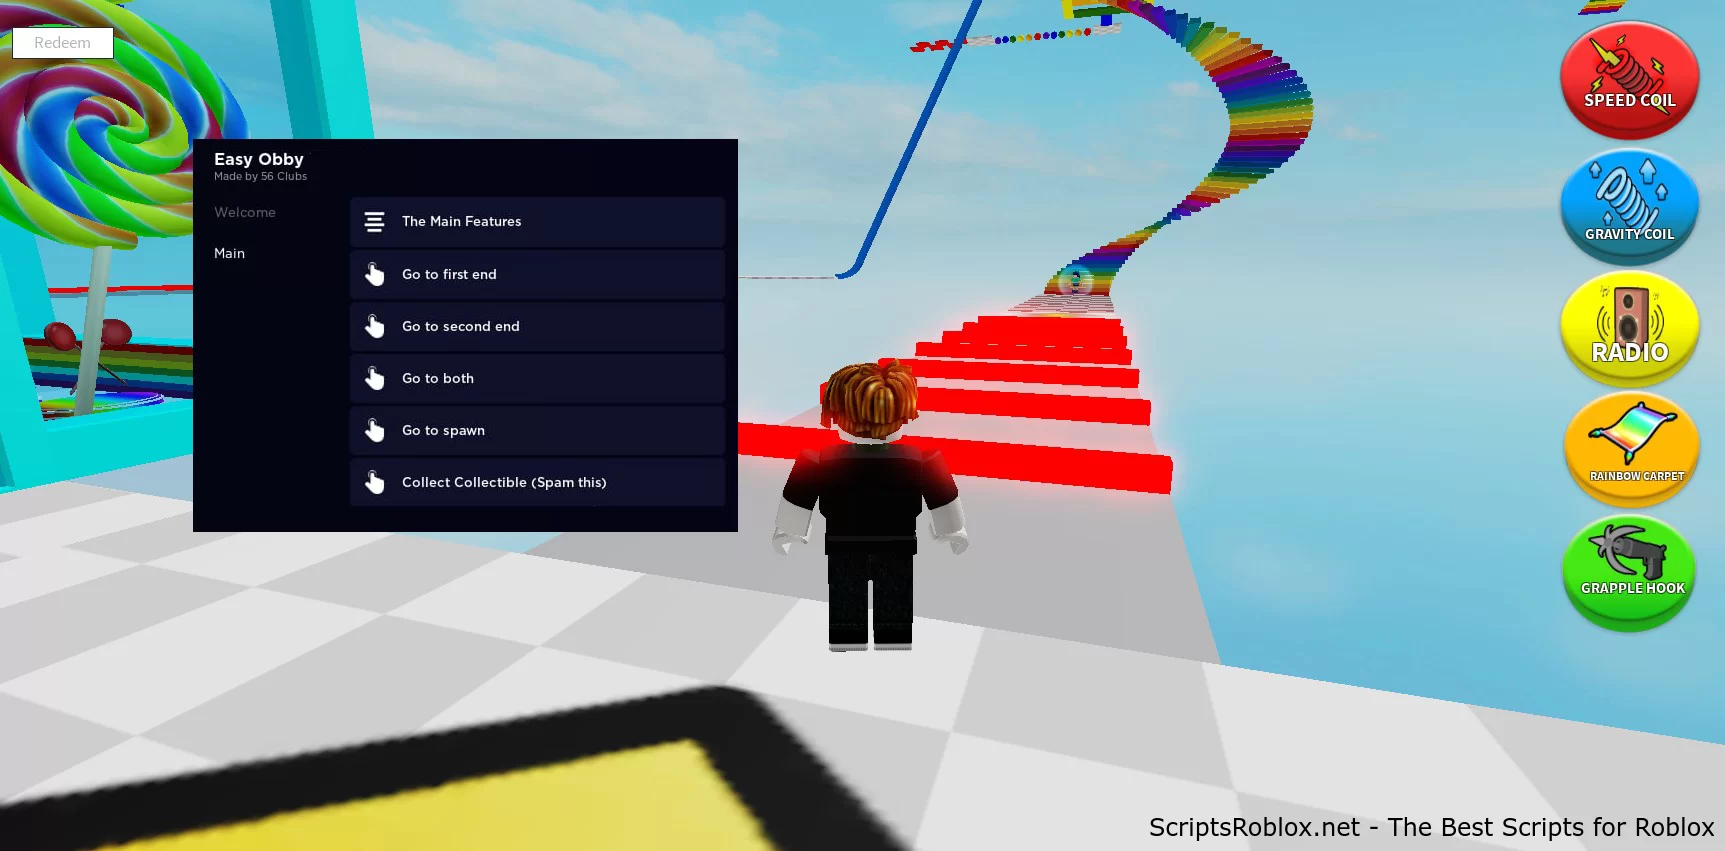 Easy Obby Roblox Script: Teleports